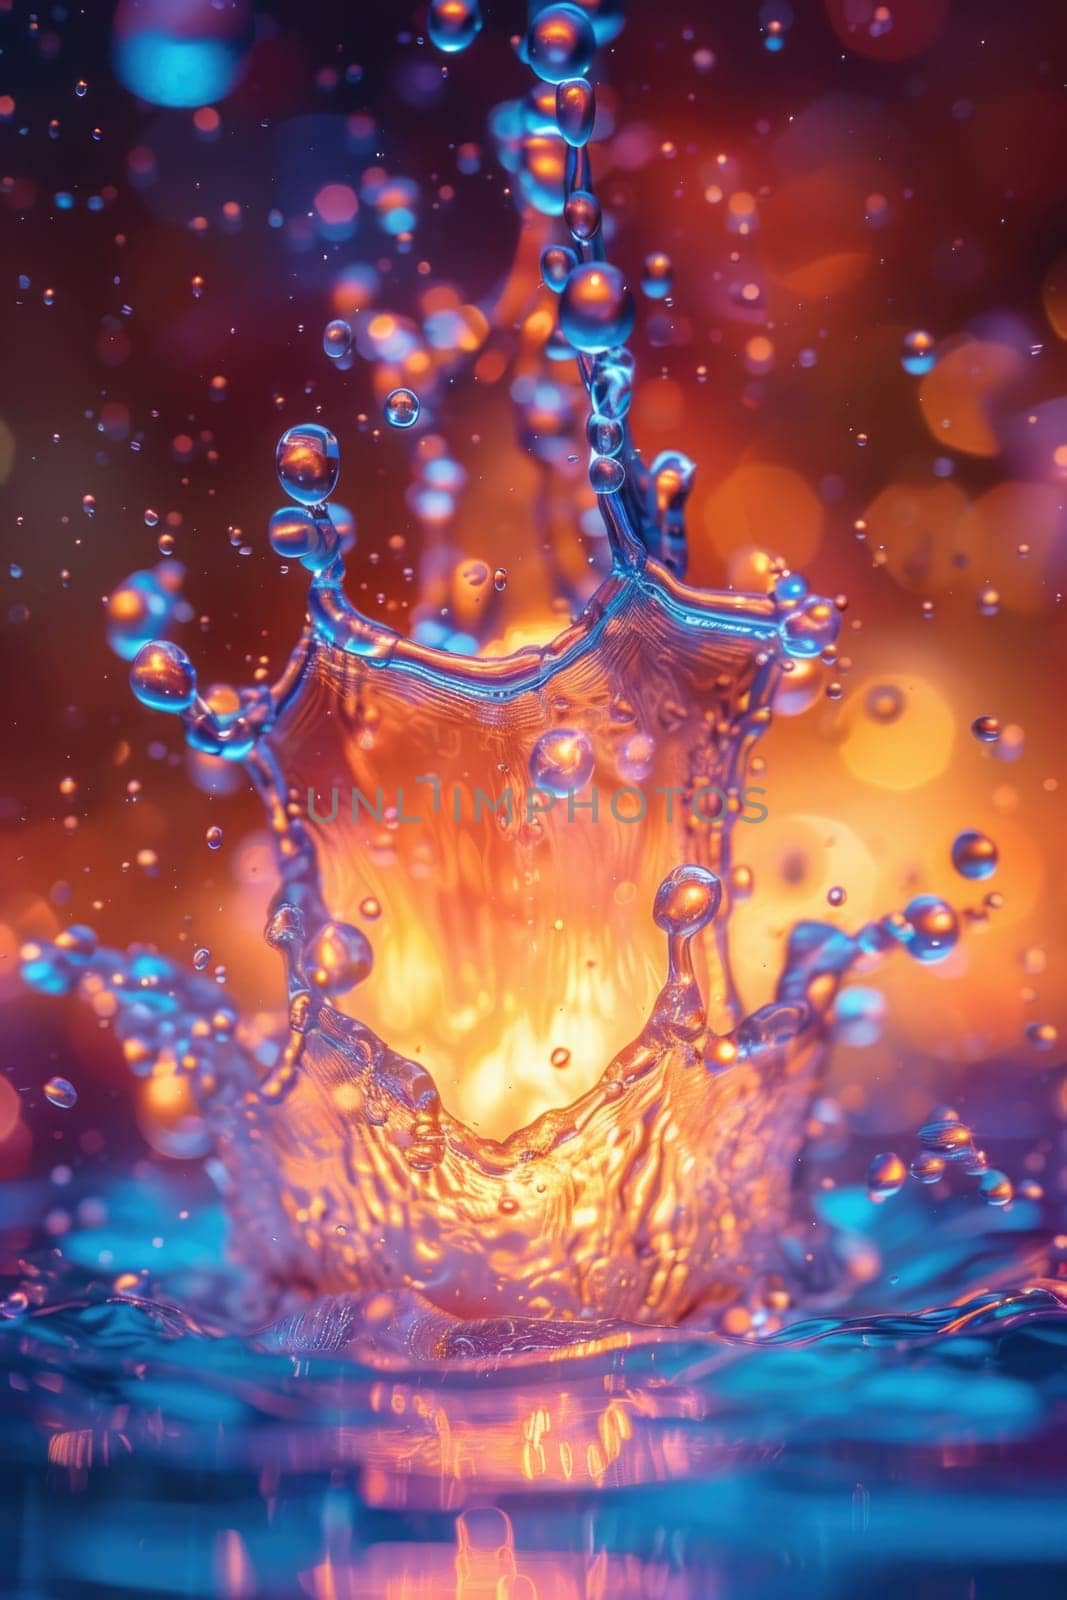 A water splash featuring a crown on top of it, capturing a unique and eye-catching moment of collision.